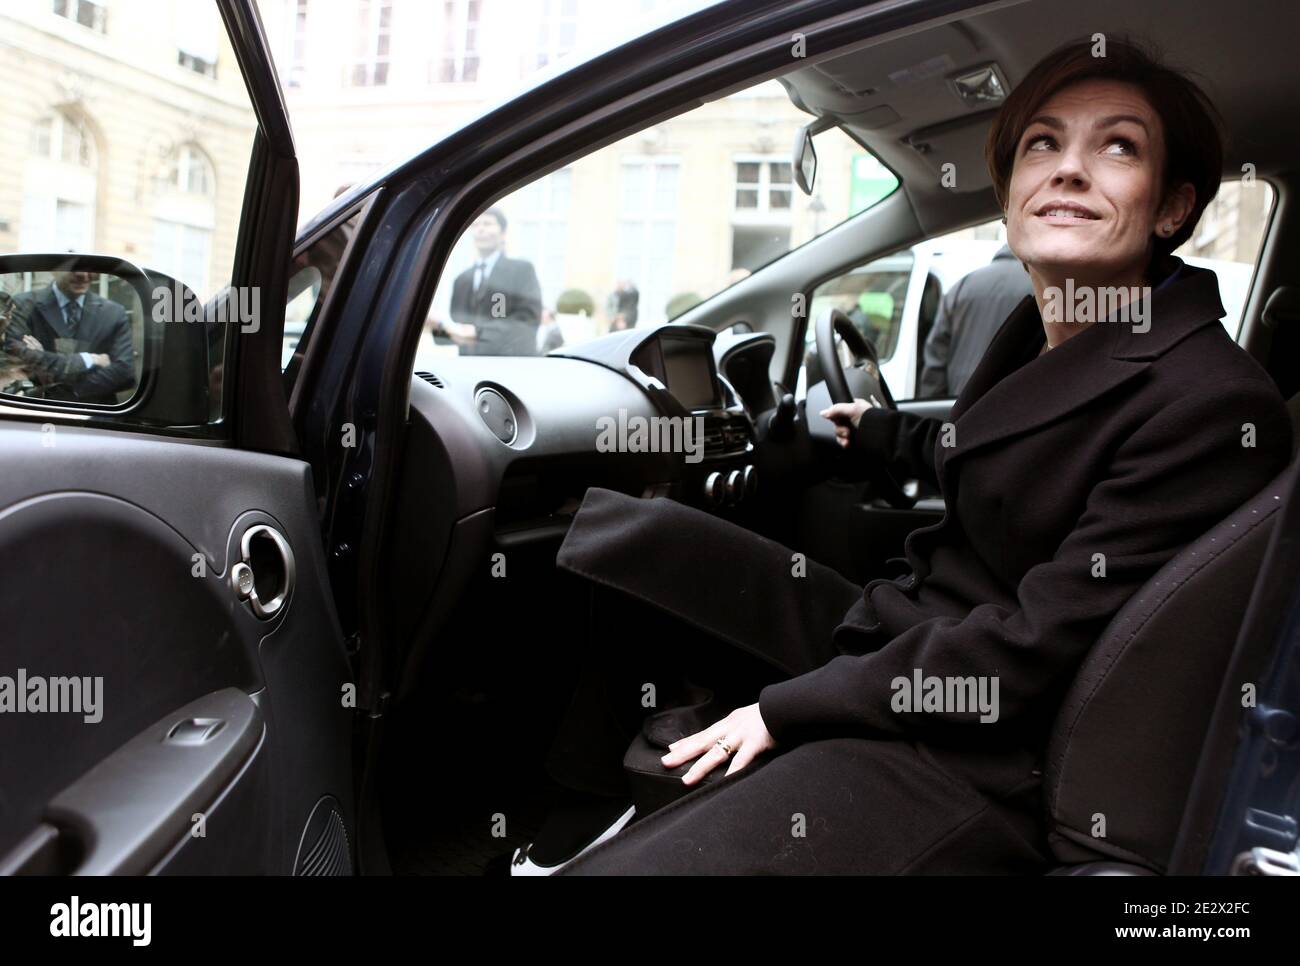 French Junior ecology minister Chantal Jouanno is pictured in the Peugeot iOn electric car in the courtyard of the Ecology ministry after a meeting focus on electric and hybrid cars development in Paris, France on April 13th, 2010. Photo by Stephane Lemouton/ABACAPRESS.COM Stock Photo